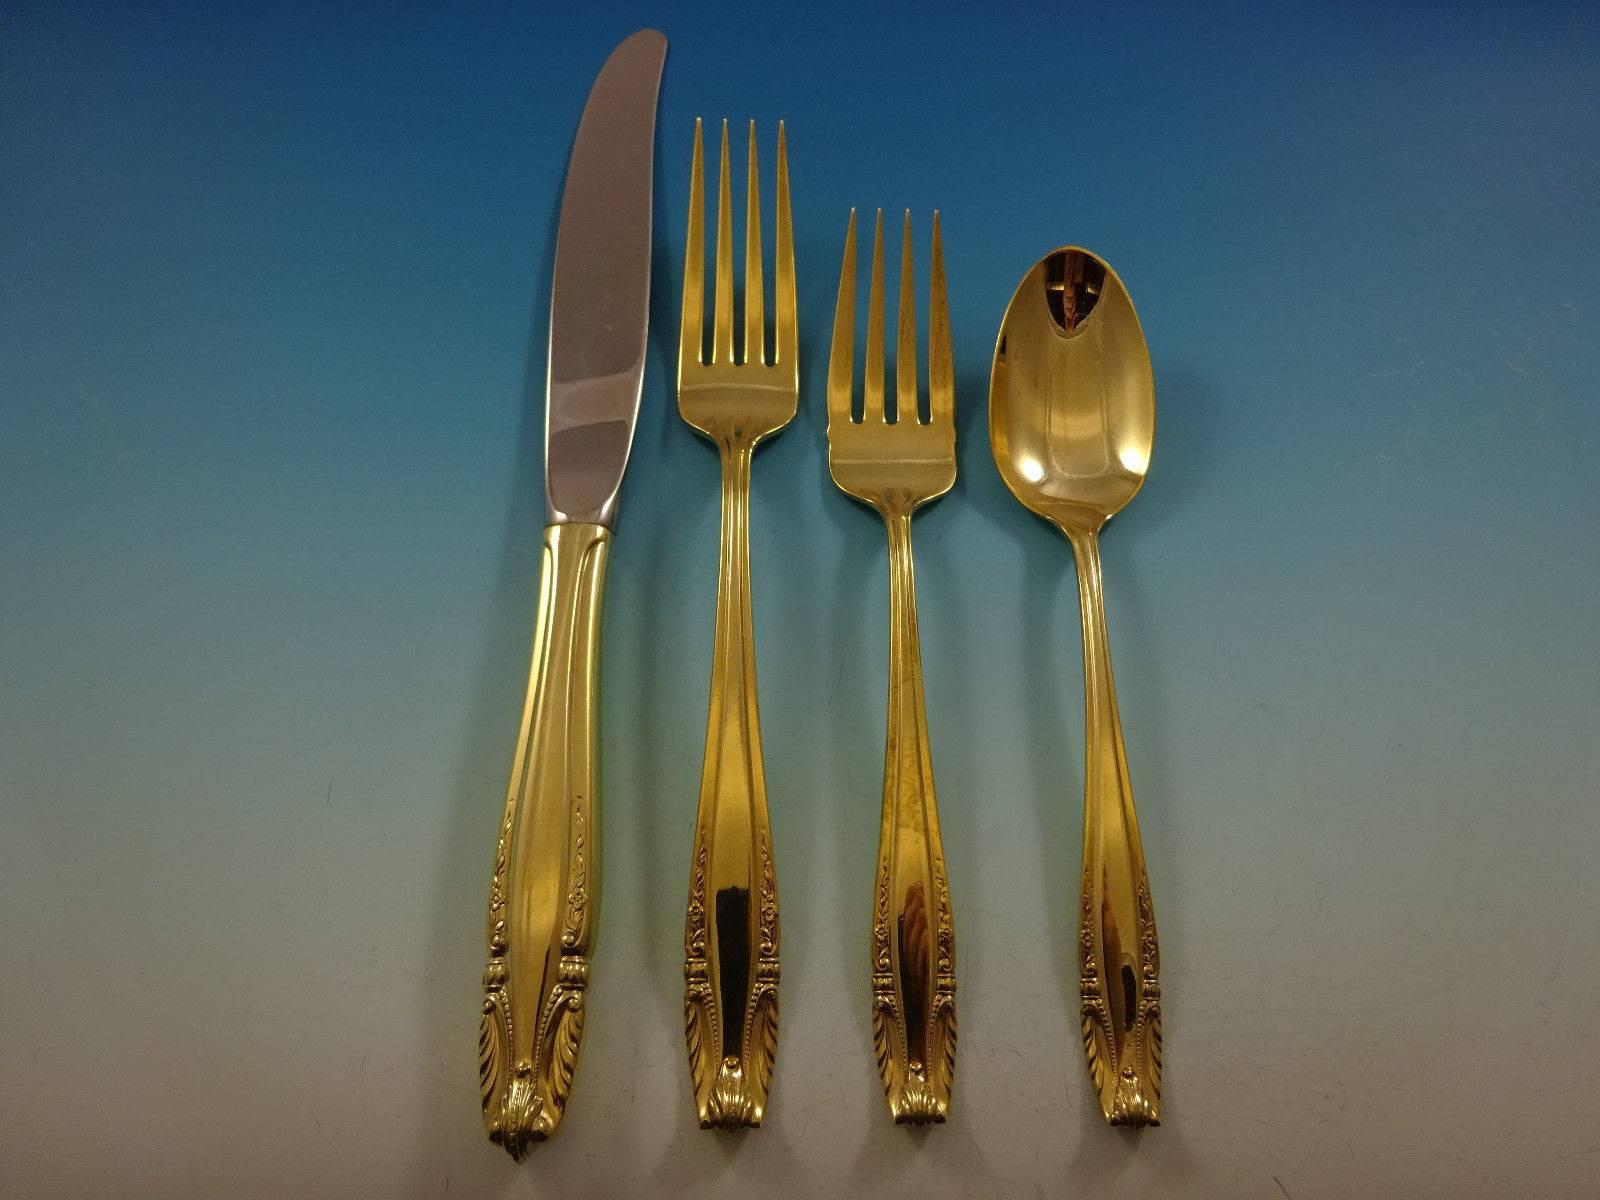 Gorgeous Stradivari gold by Wallace Sterling Silver flatware set 48 pieces. Gold flatware is on trend and makes a bold statement on your table. 

This set is vermeil (completely gold-washed) and includes:
 
12 knives, 9 1/8